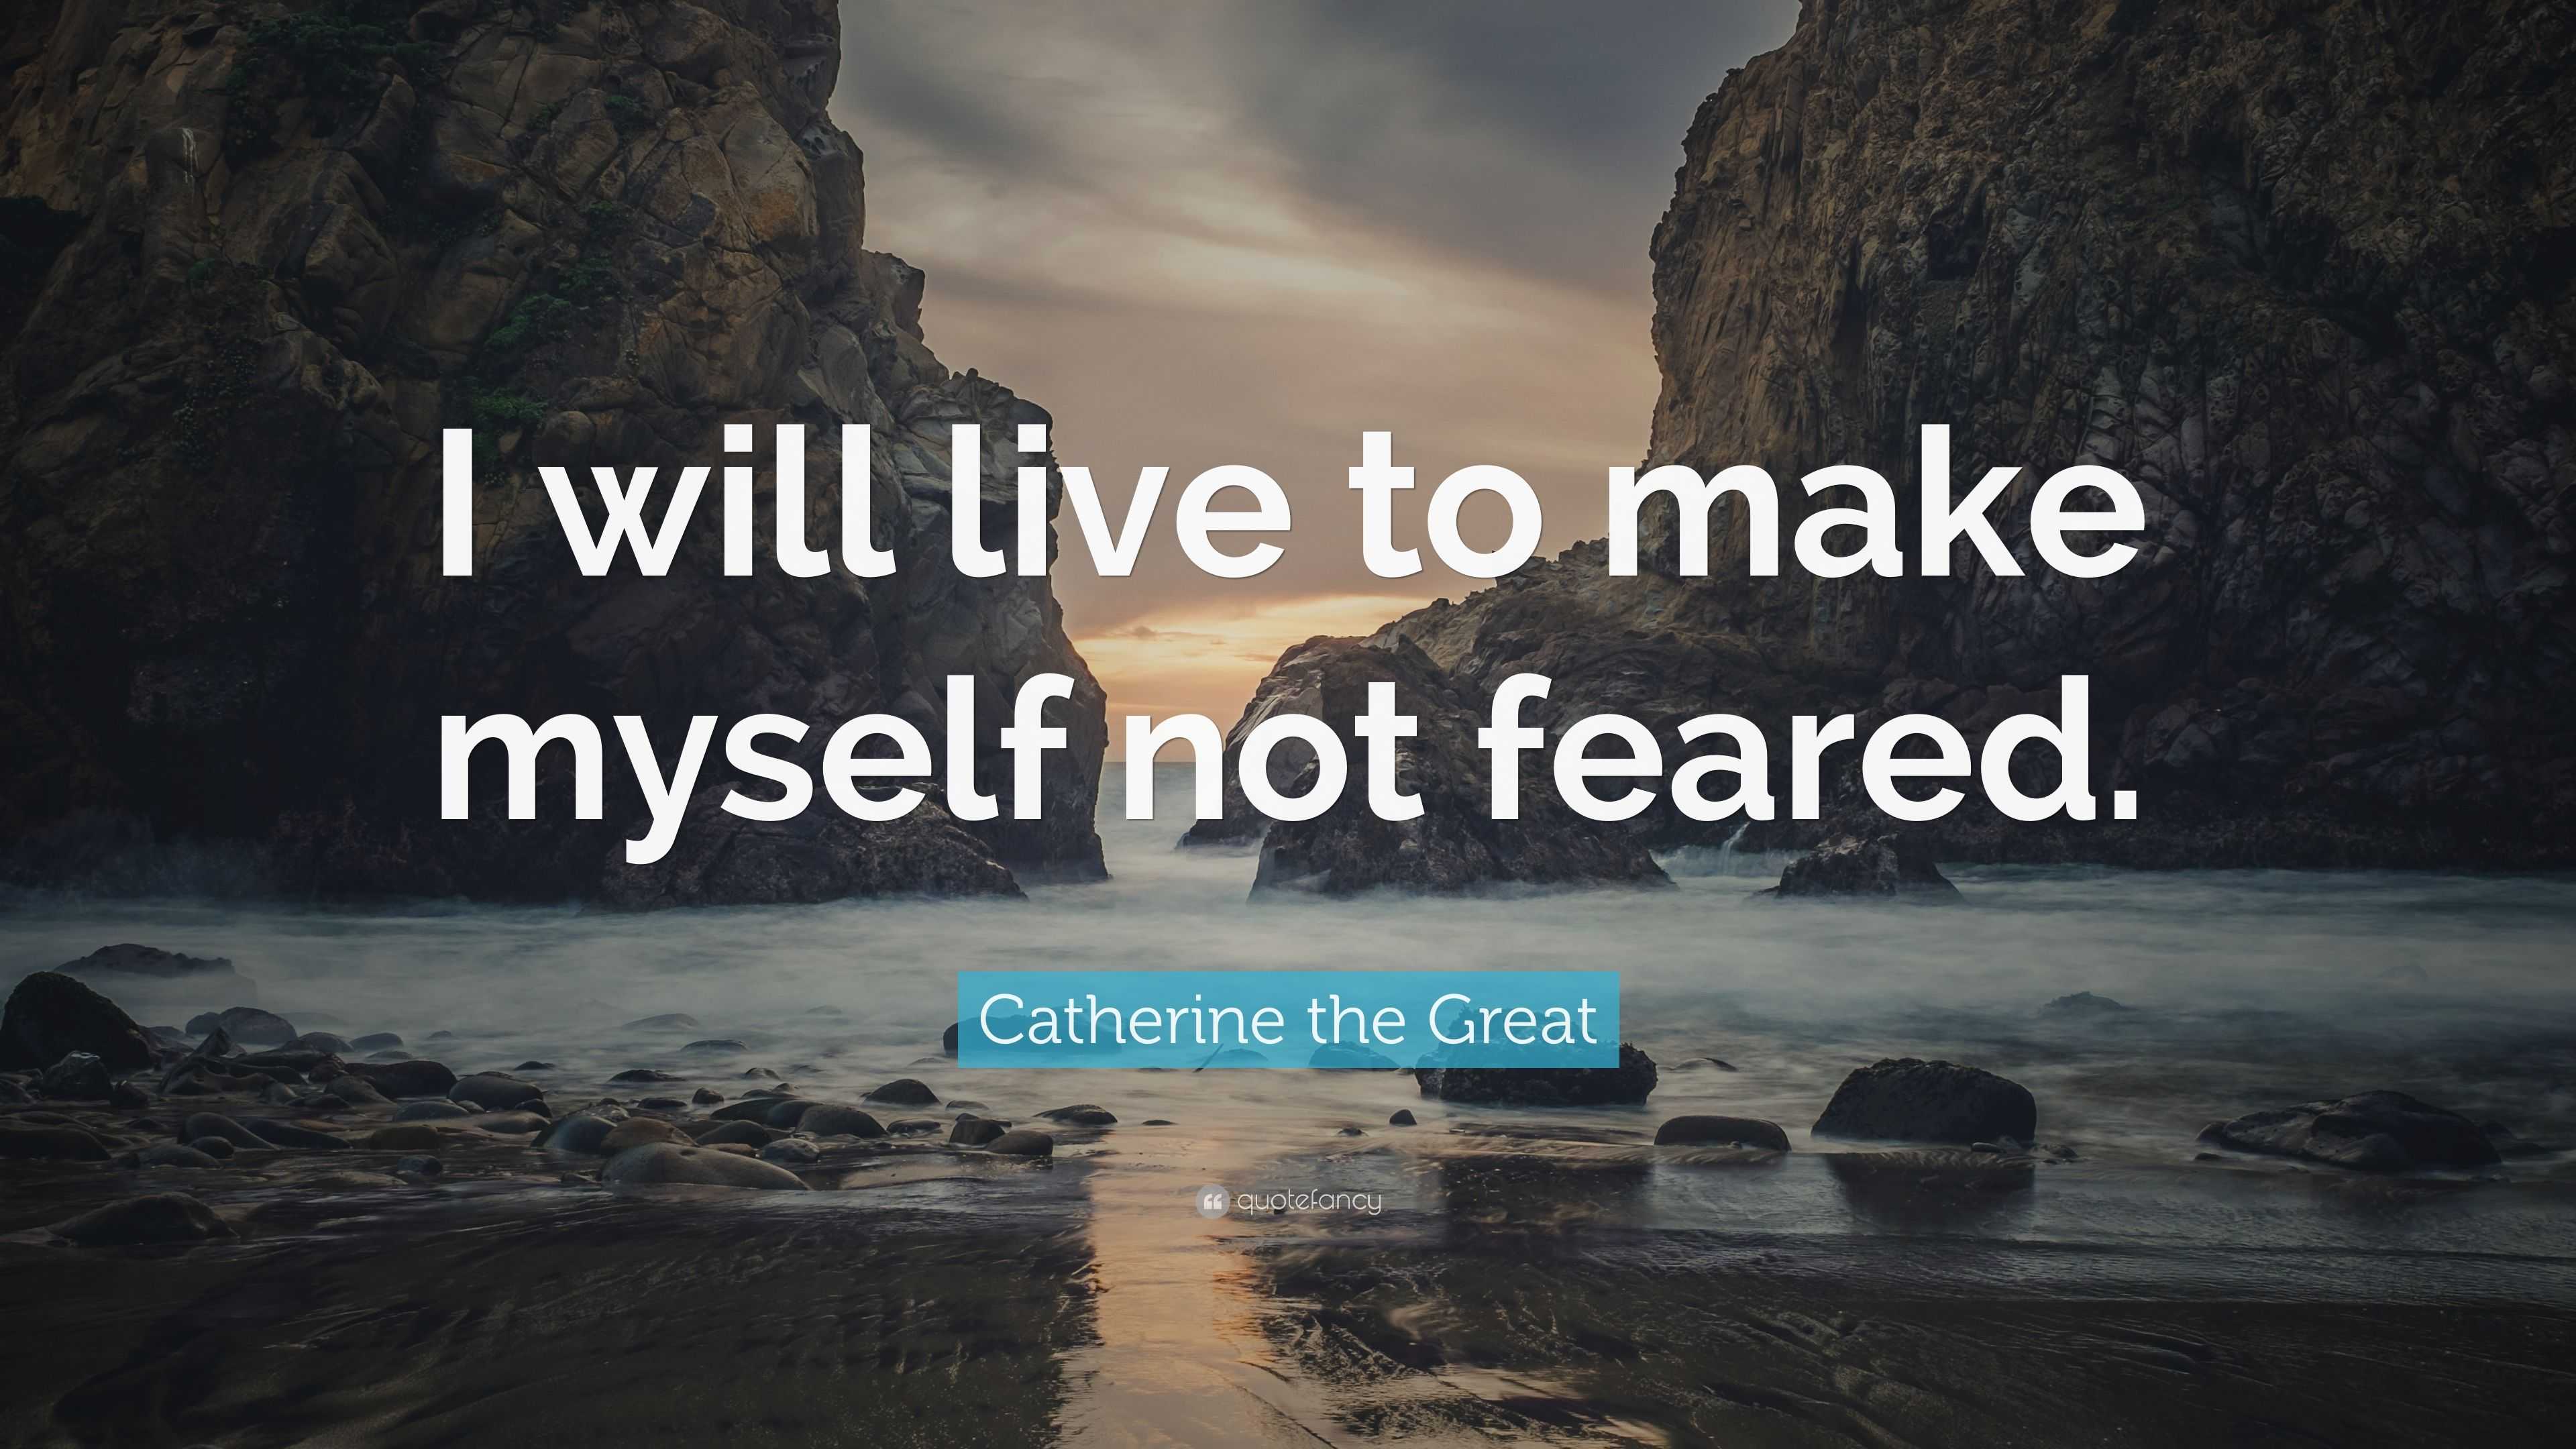 Catherine the Great Quote: "I will live to make myself not feared." (7 wallpapers) - Quotefancy